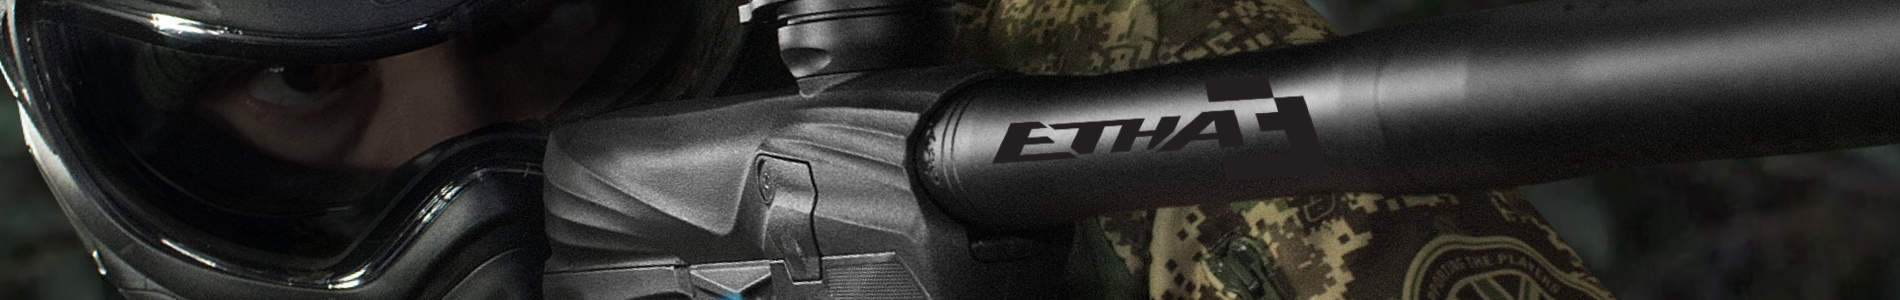 The Eclipse Etha3 marker being used in the woods